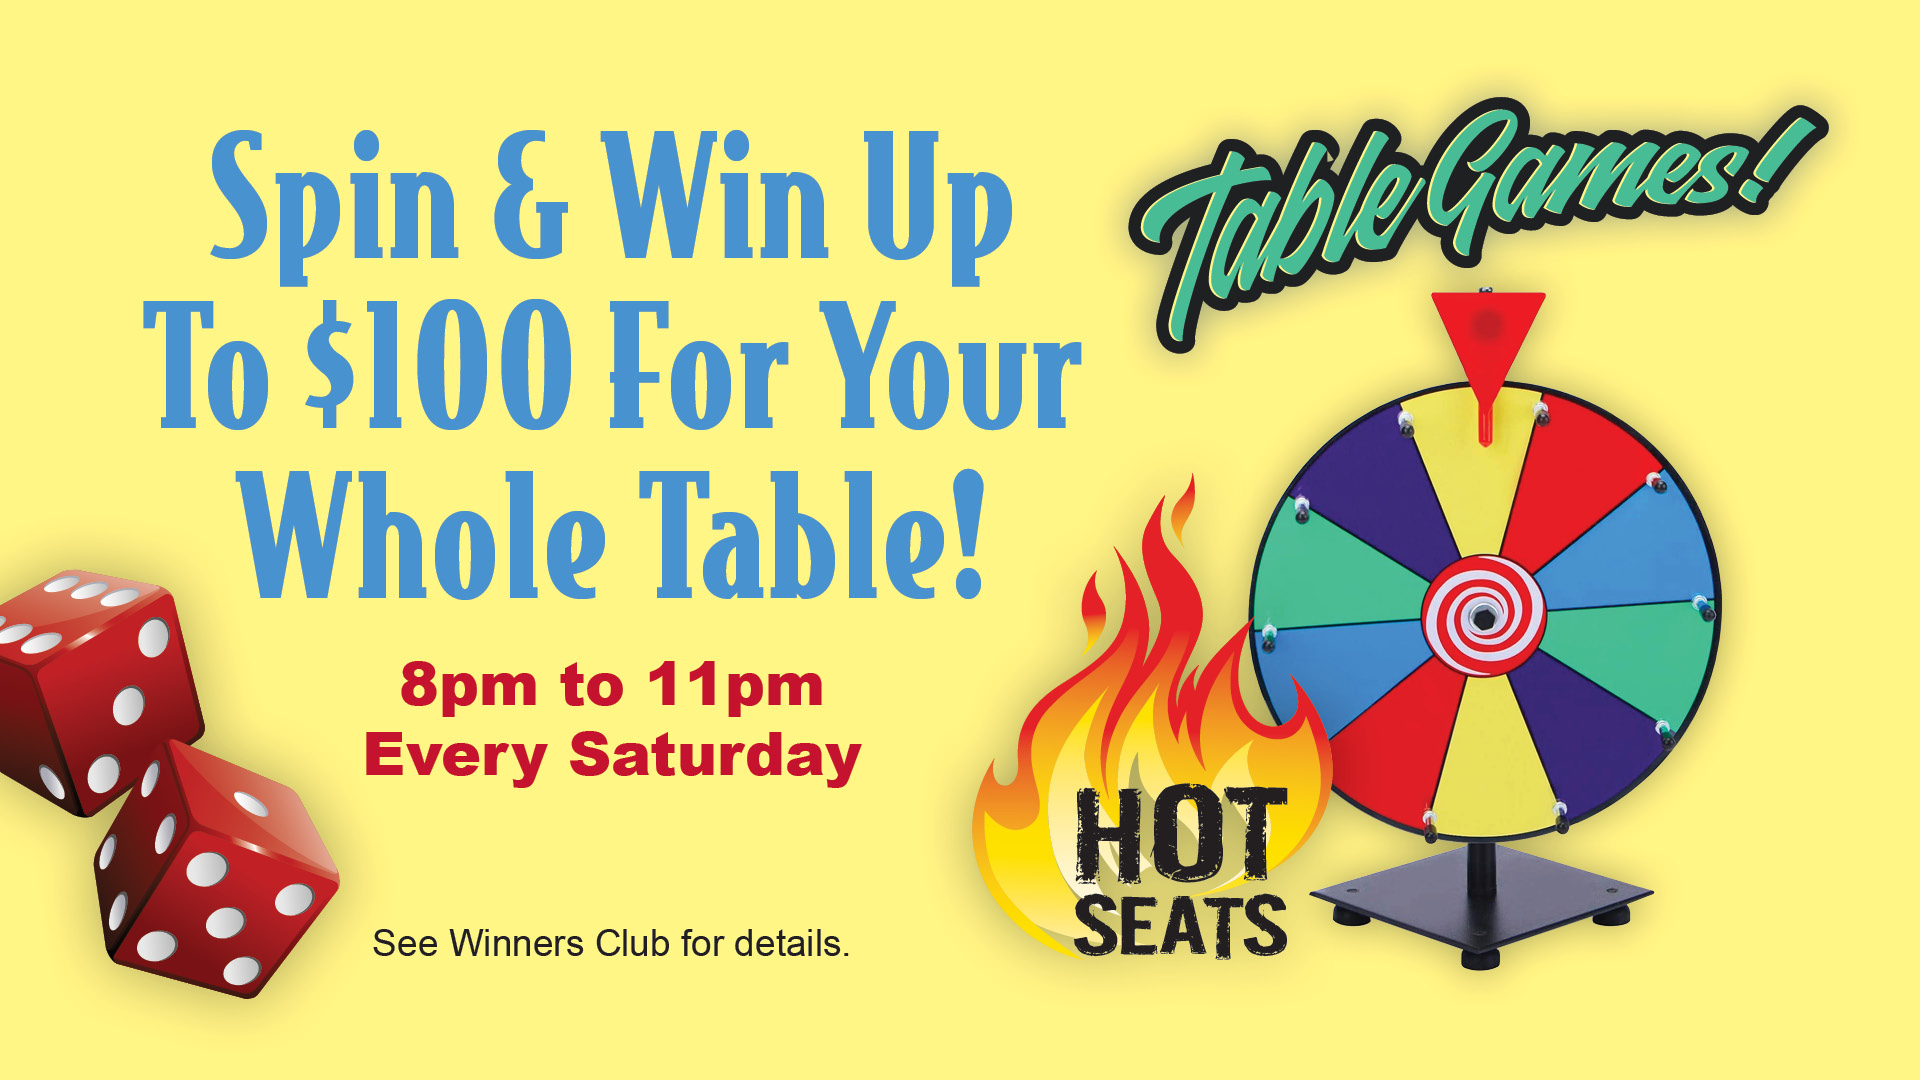 Spin & Win Table Games